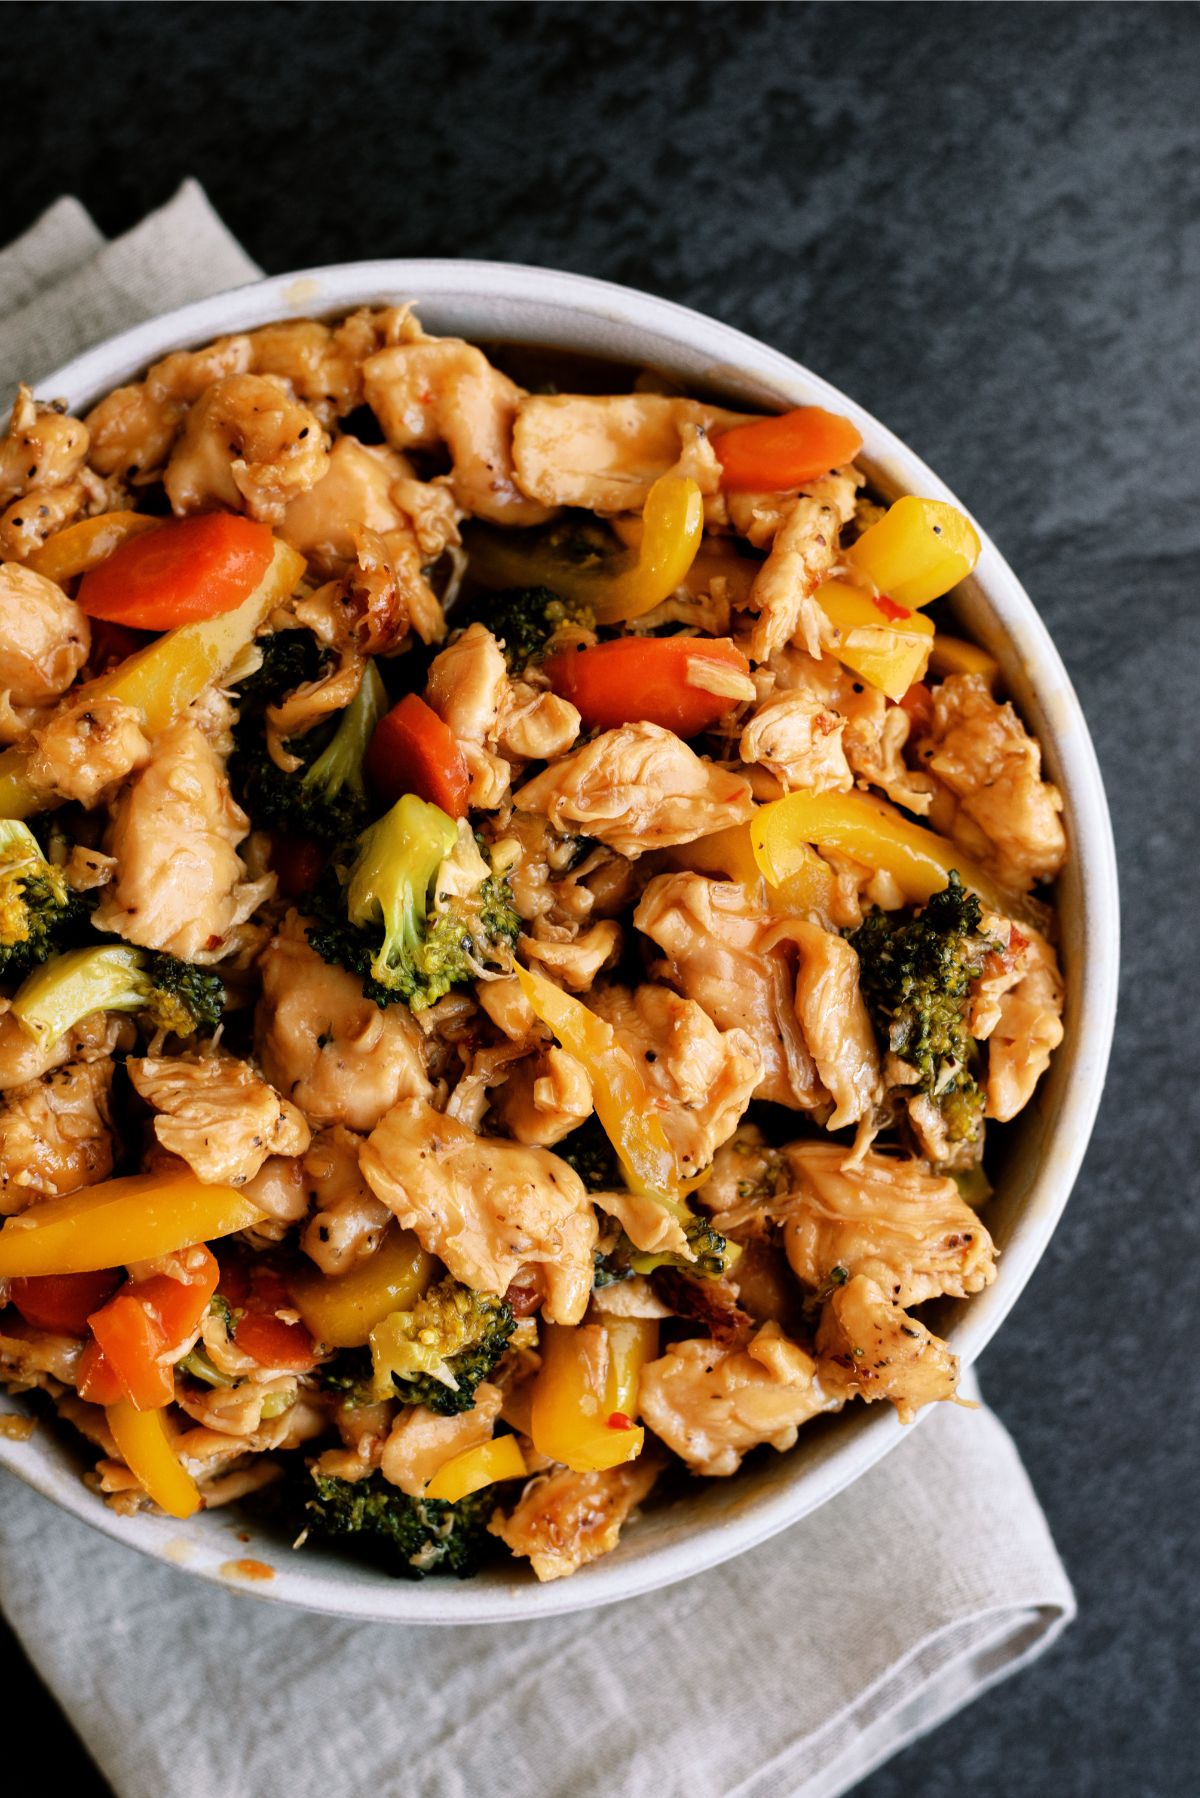 Top view of a bowl of Instant Pot Chicken and Veggie Stir Fry